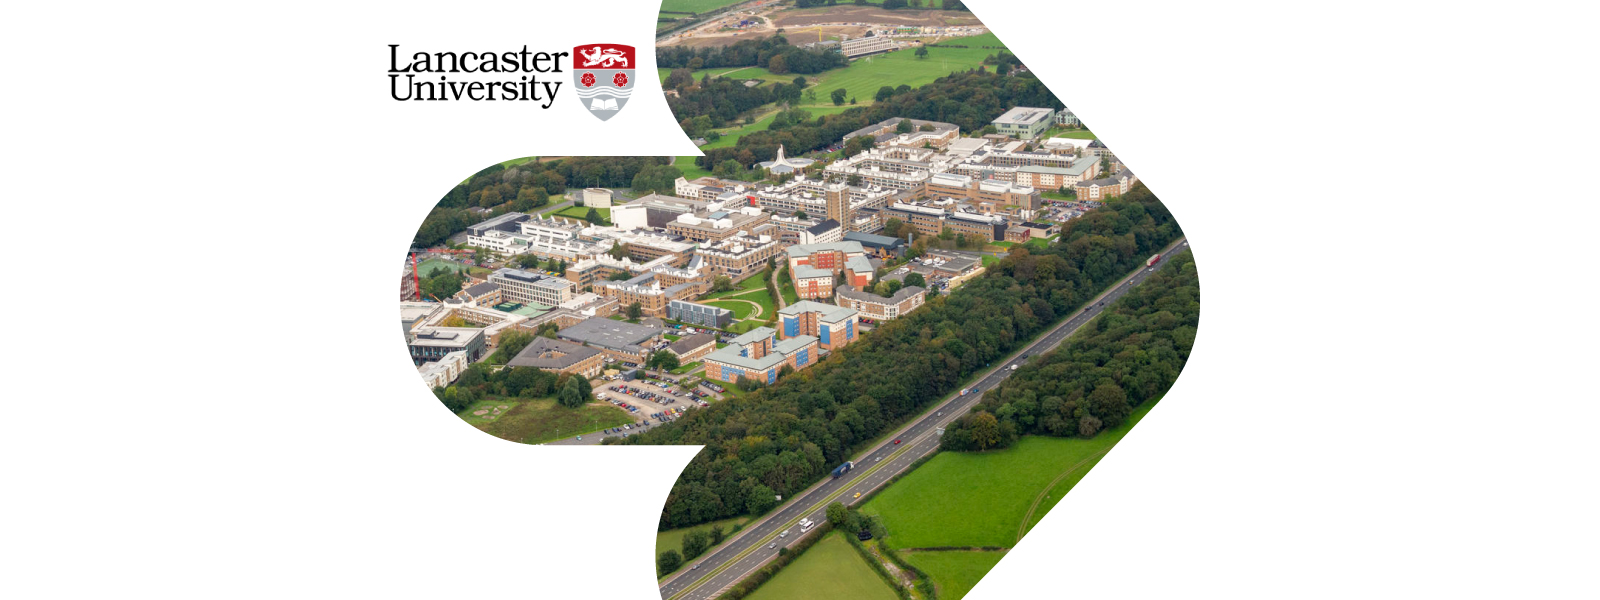 Lancaster University from above